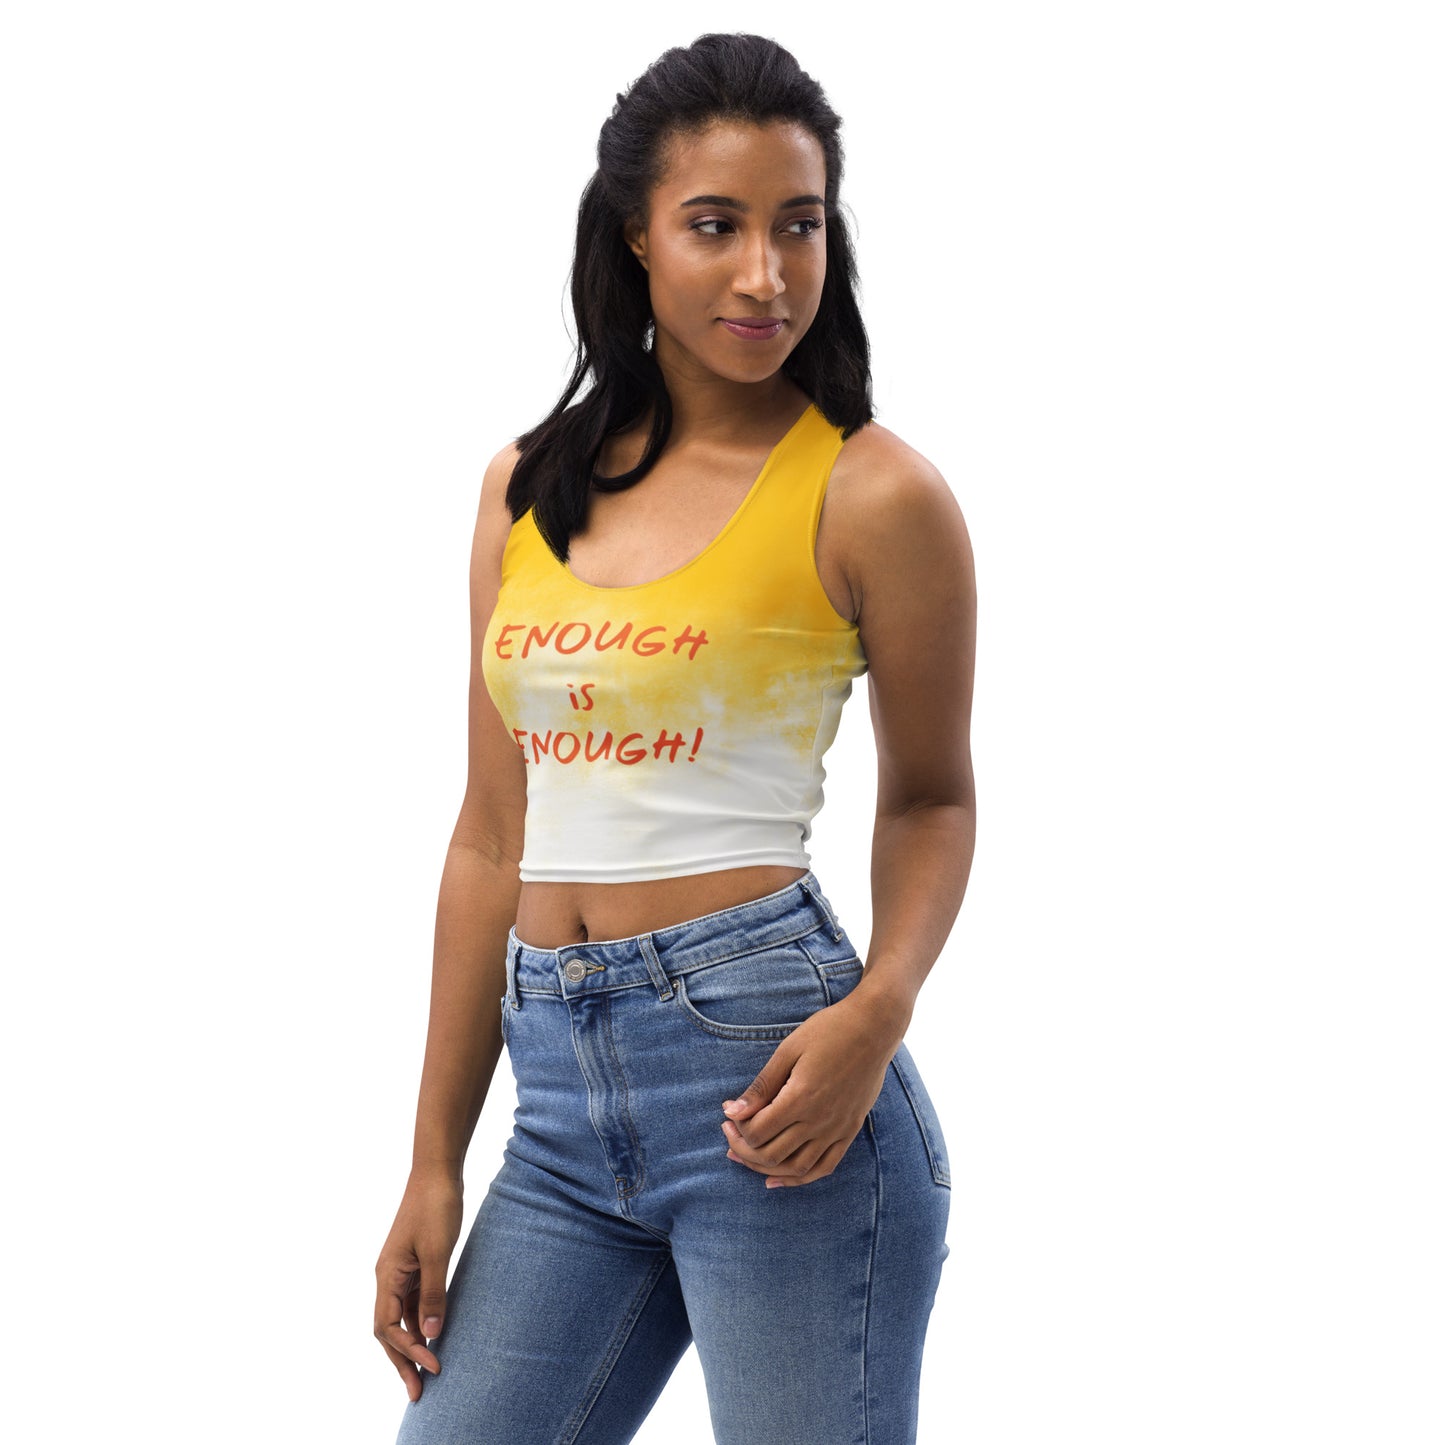 Sunny Day Crop Top - ENOUGH IS ENOUGH!